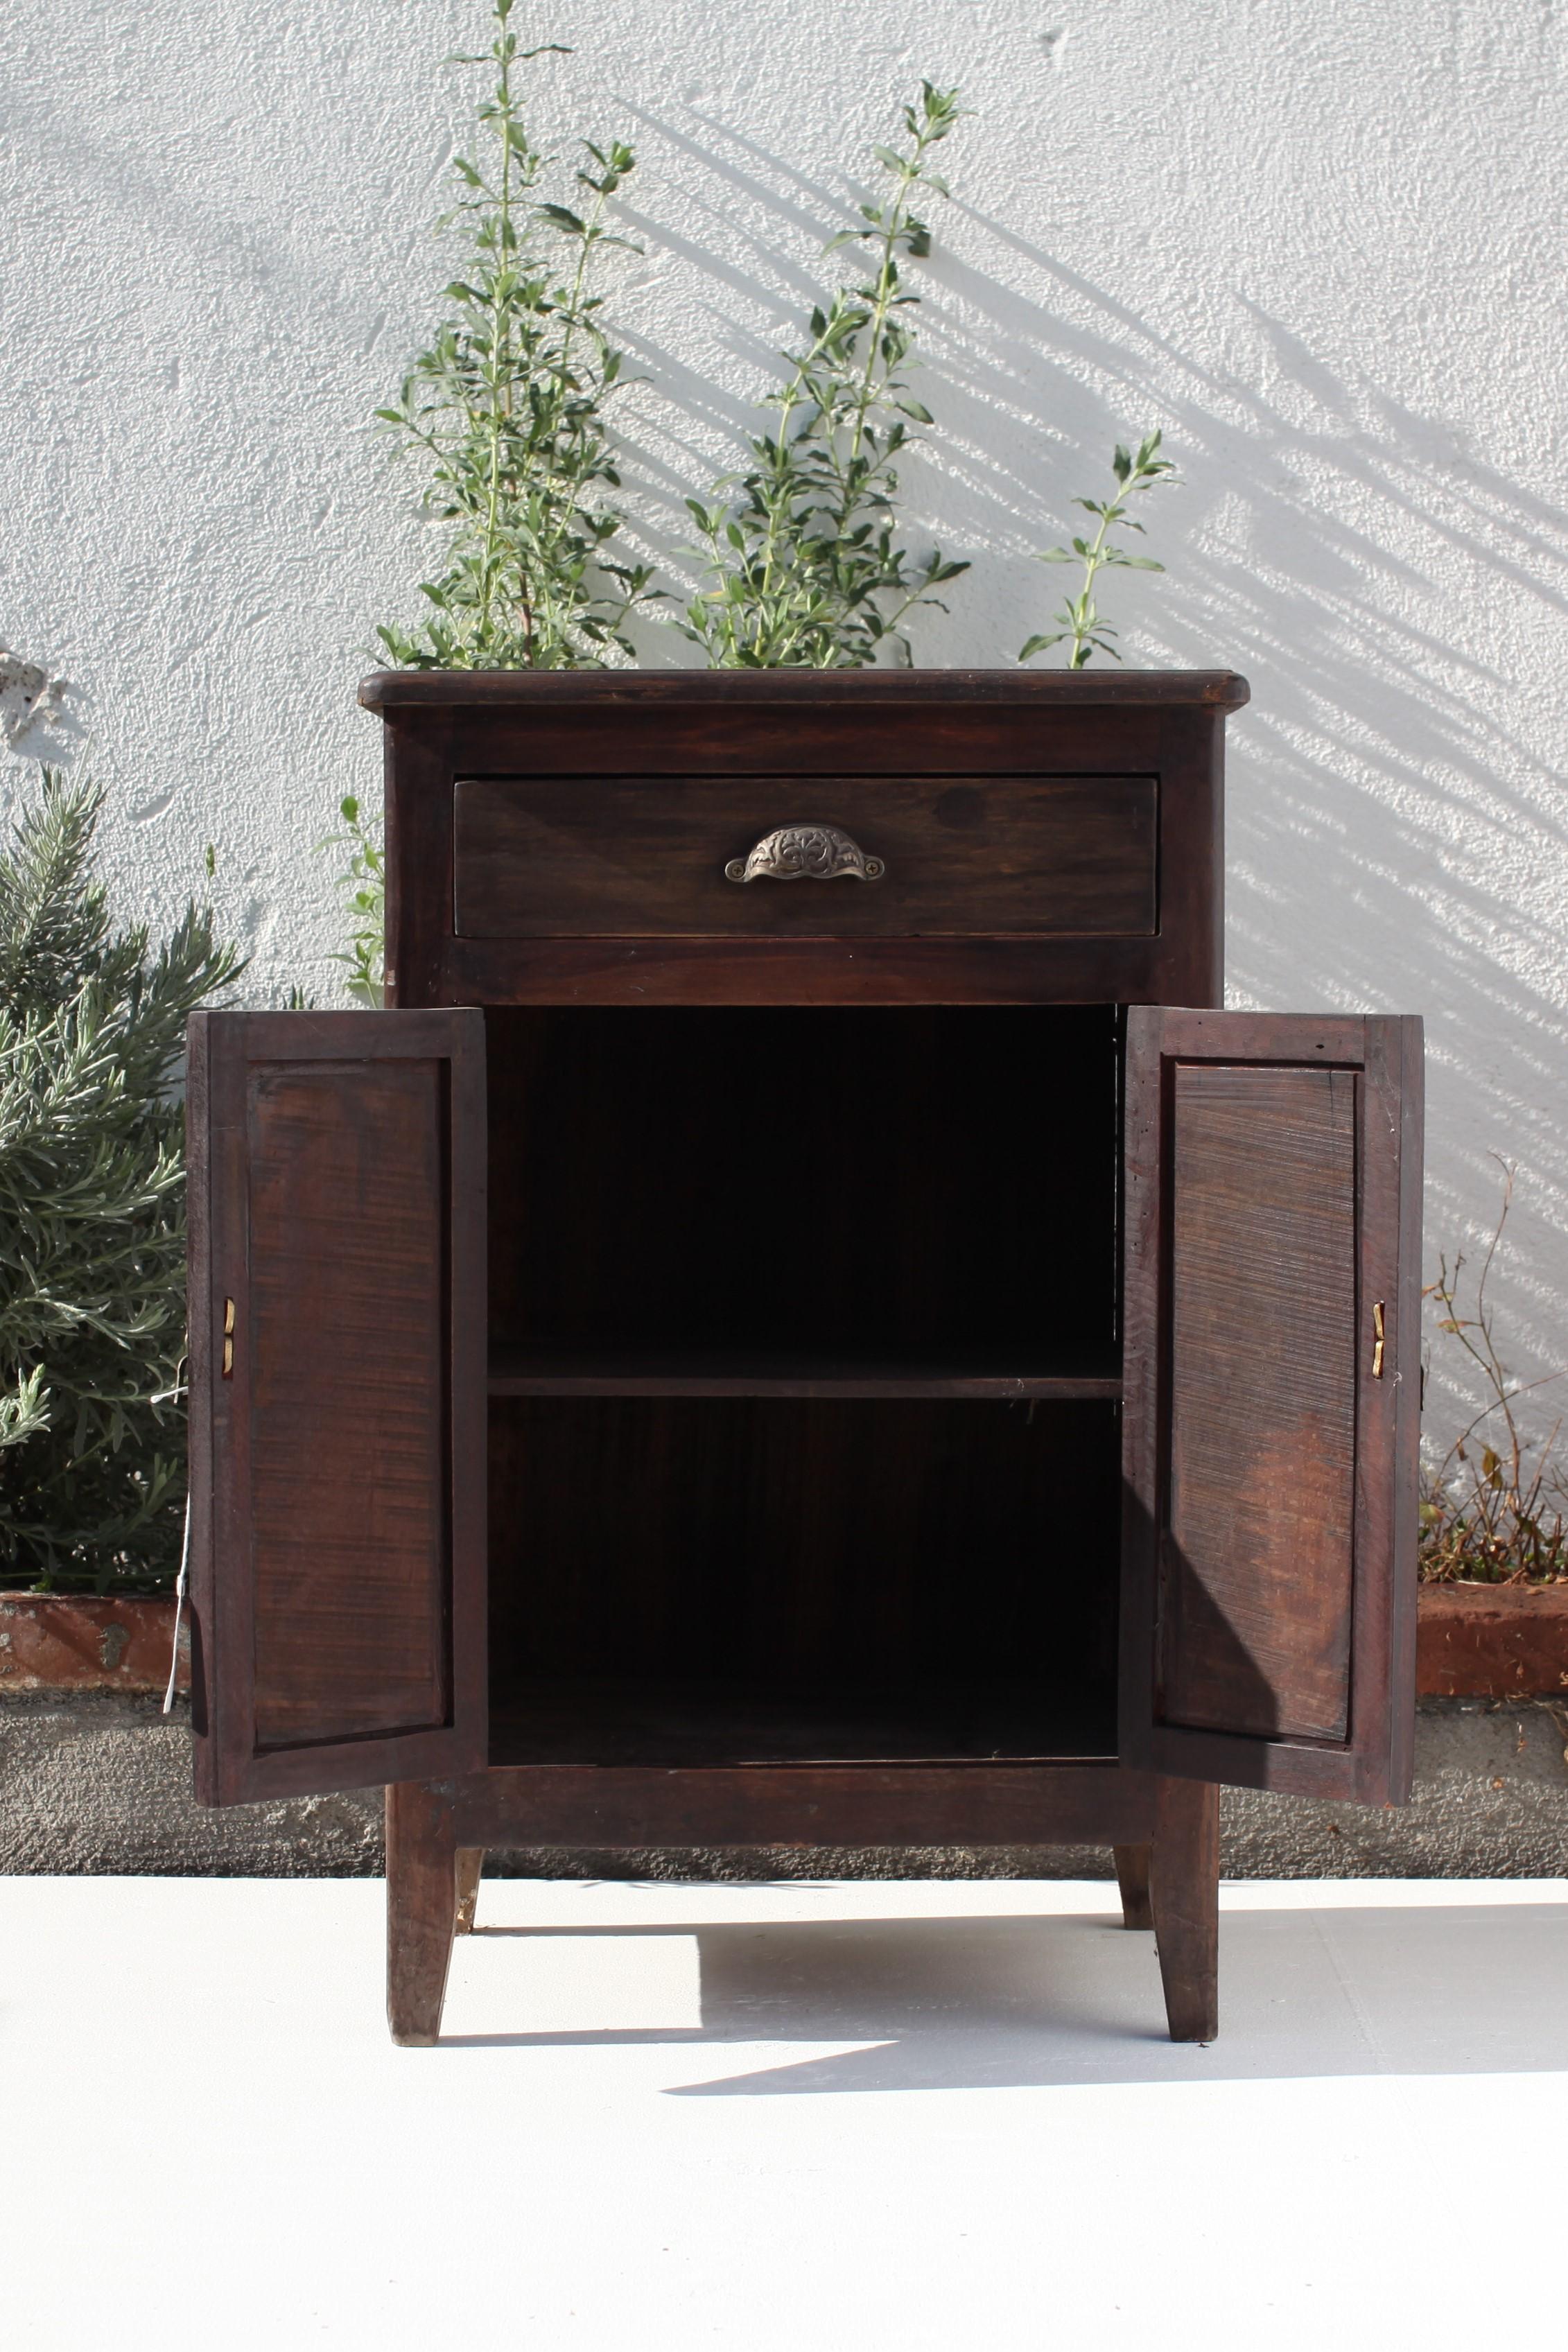 Vietnamese French Colonial Country Patina Teak Cabinet, Circa 1930's For Sale